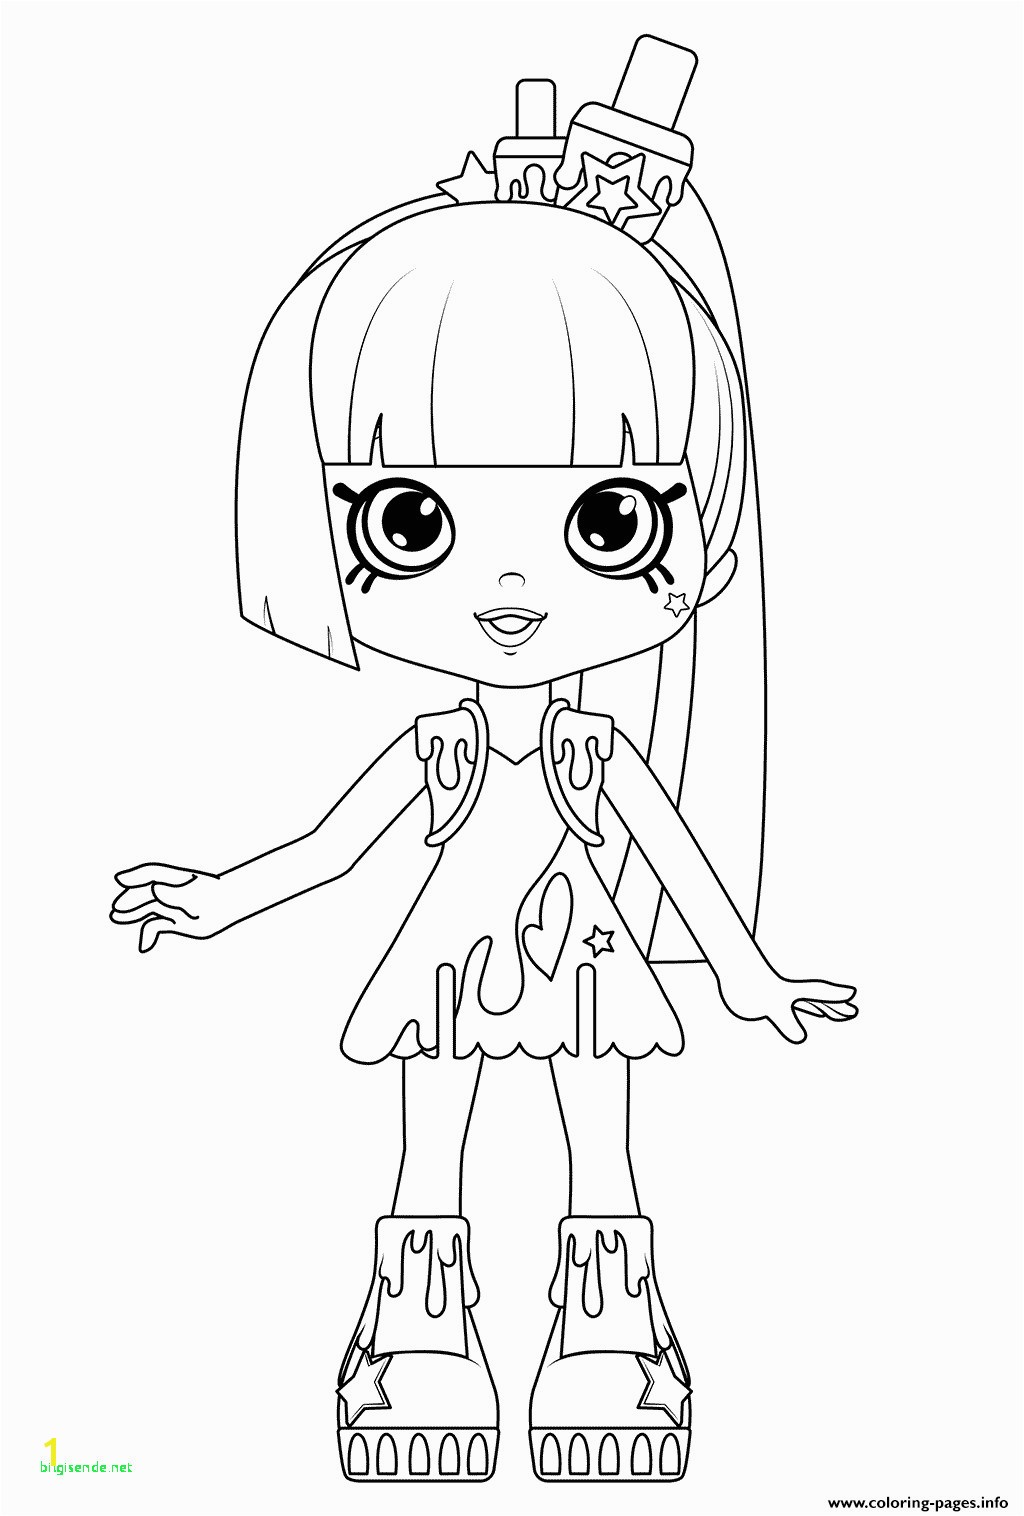 Shopkins Happy Places Coloring Pages Beautiful Coloring Pages for Girls Shopkins Printable Faces to Color